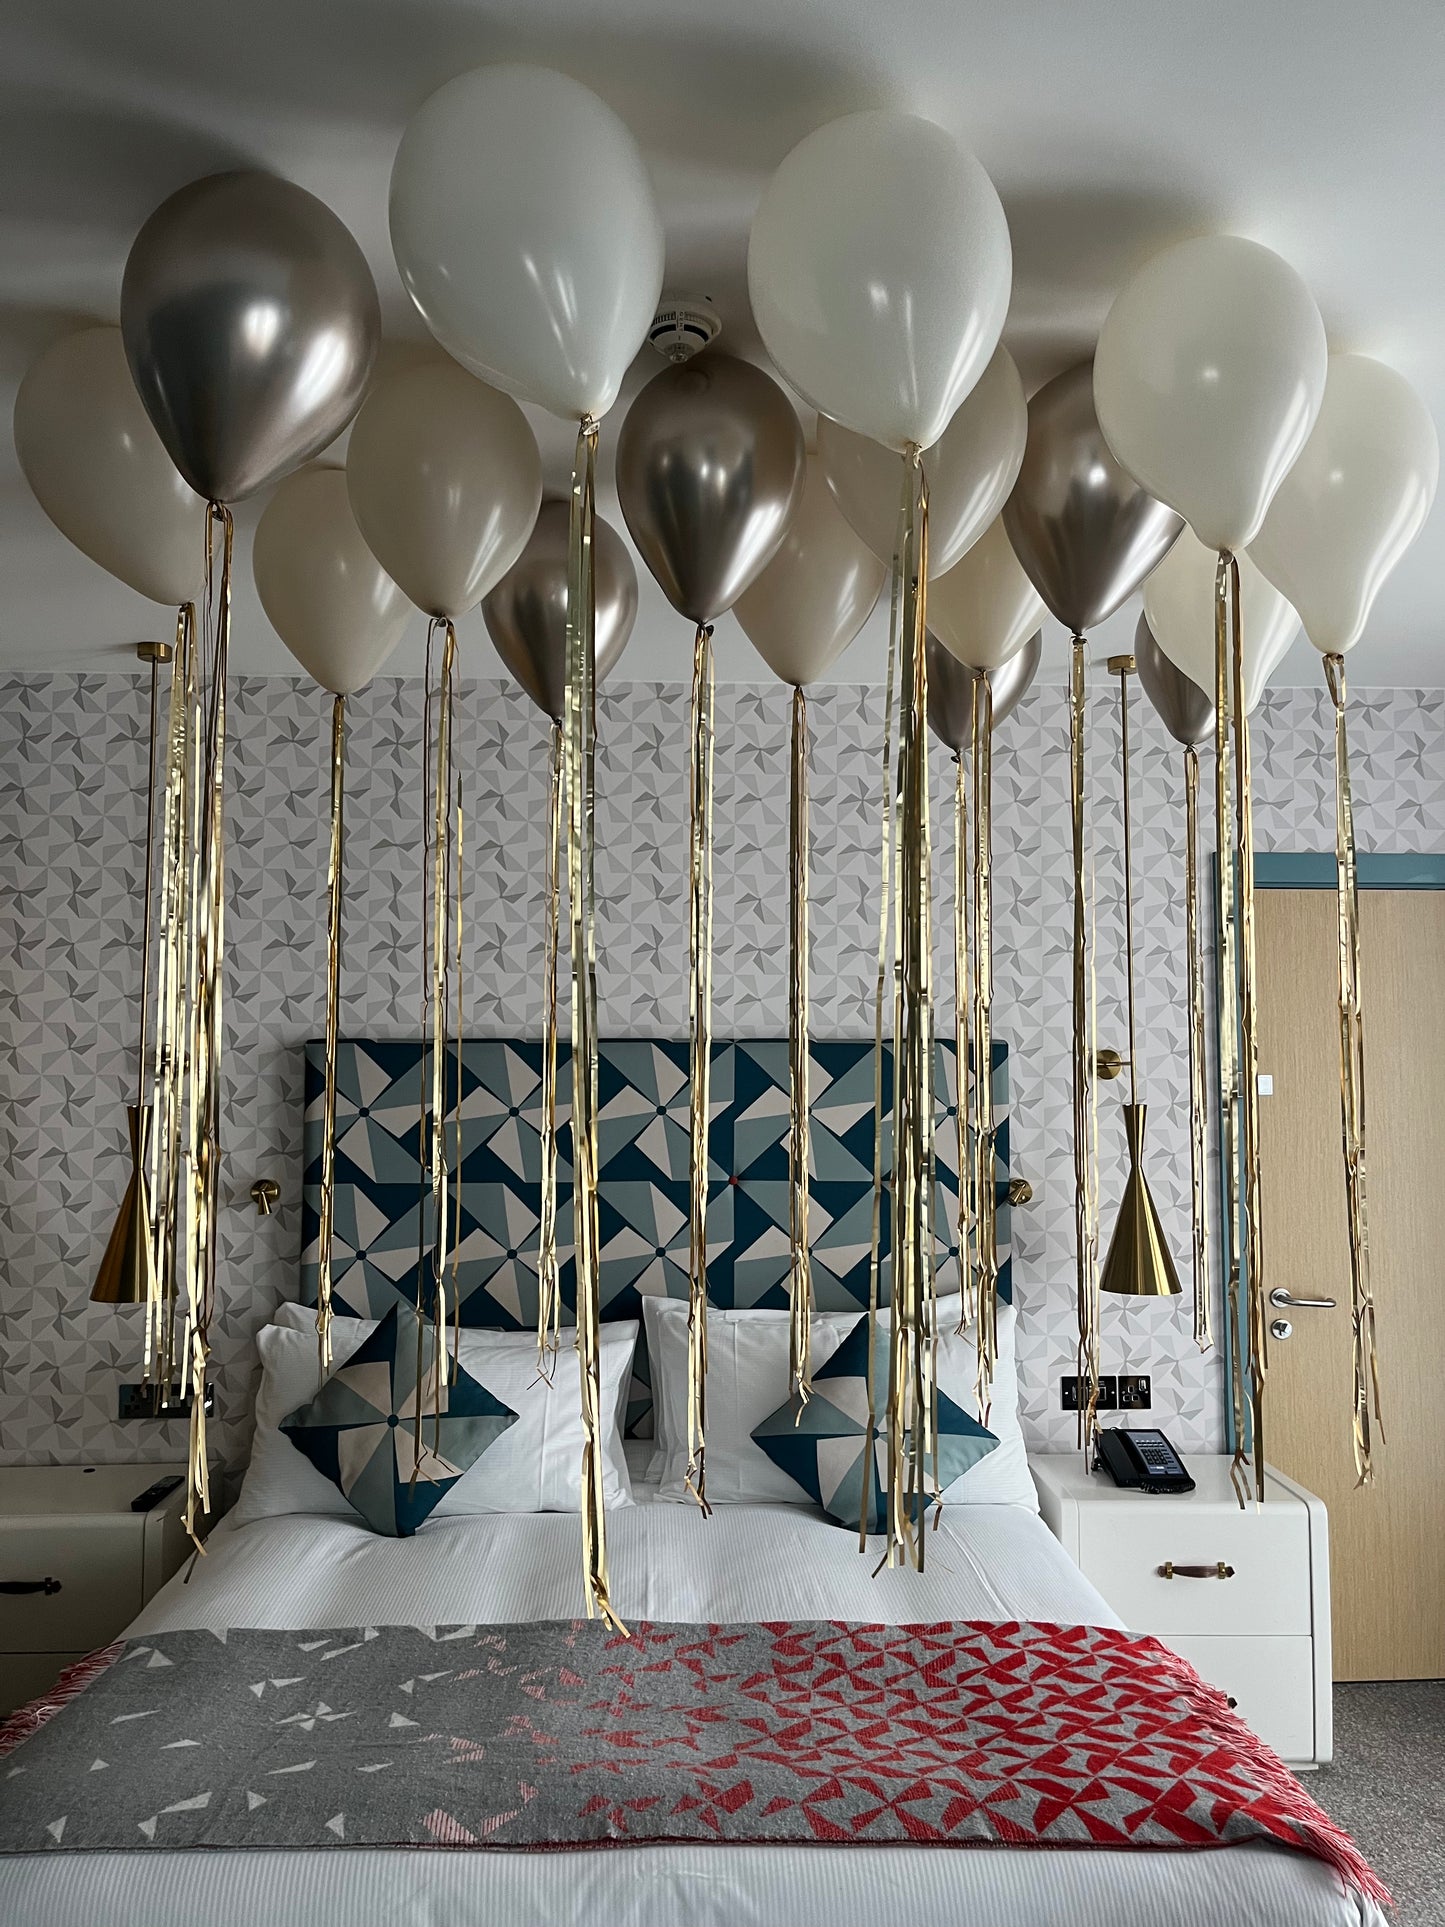 Ceiling Balloons - Latex